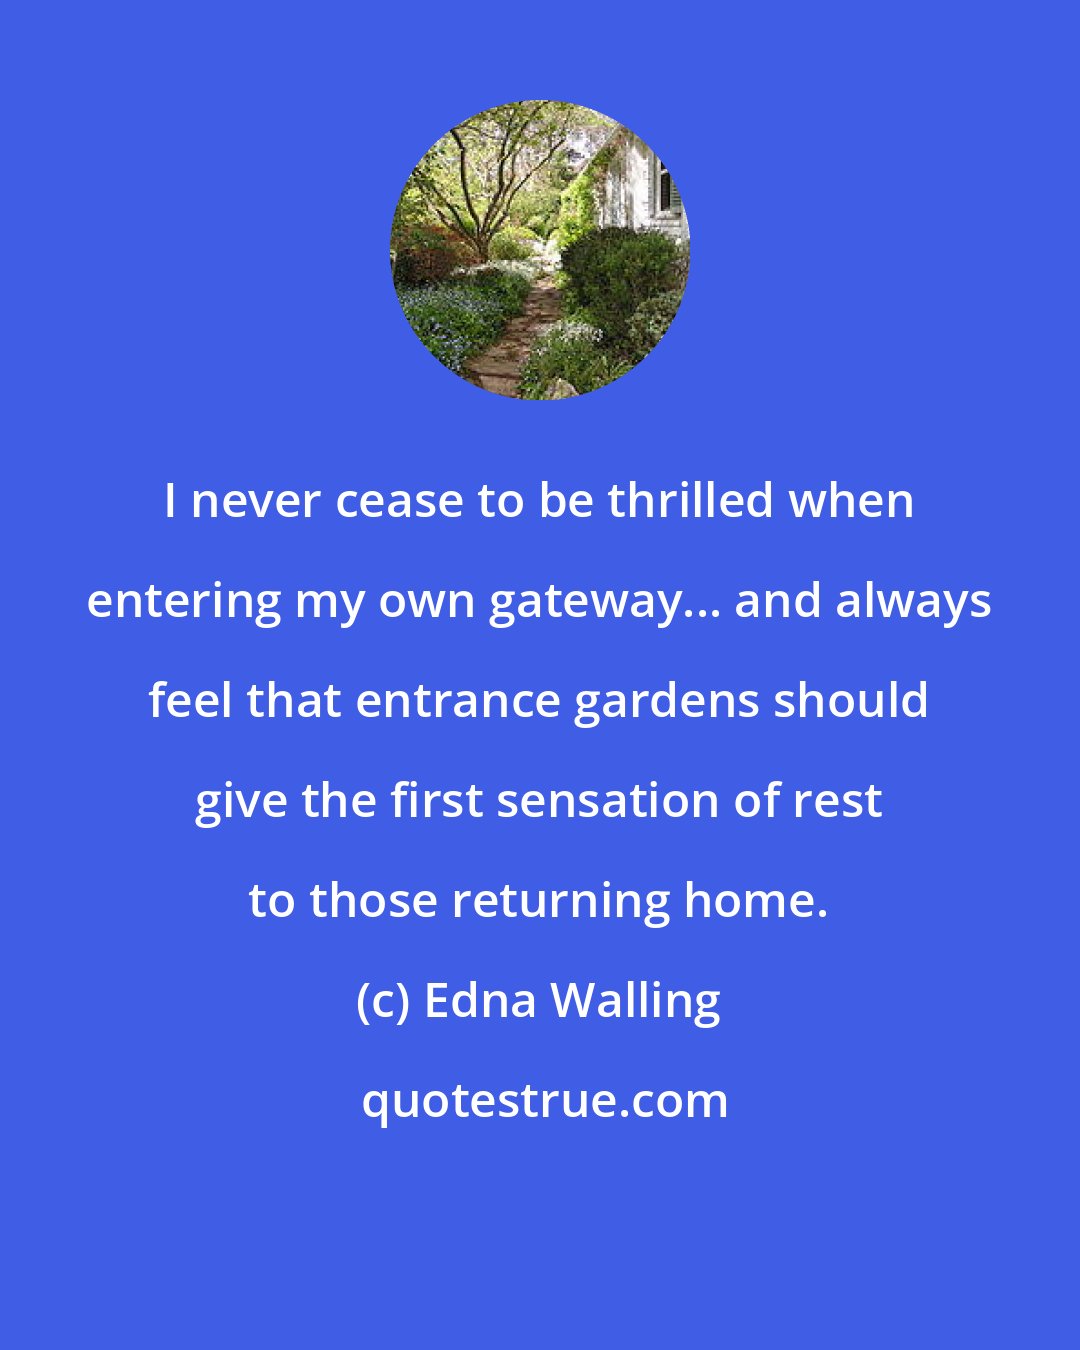 Edna Walling: I never cease to be thrilled when entering my own gateway... and always feel that entrance gardens should give the first sensation of rest to those returning home.